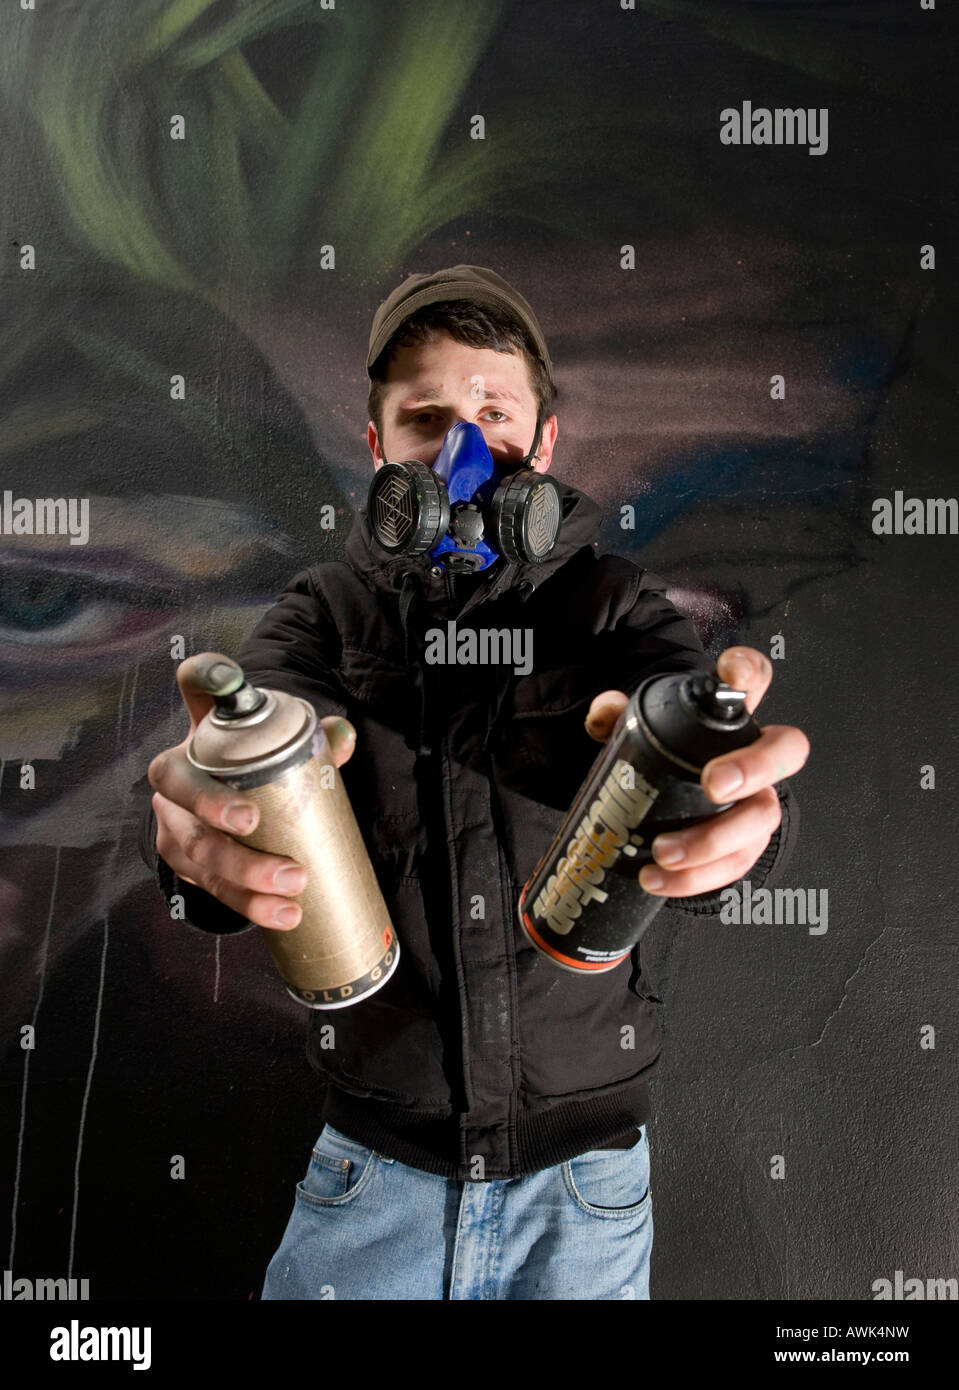 Graffiti Artist with mask spray paints a mural on a wall Stock Photo